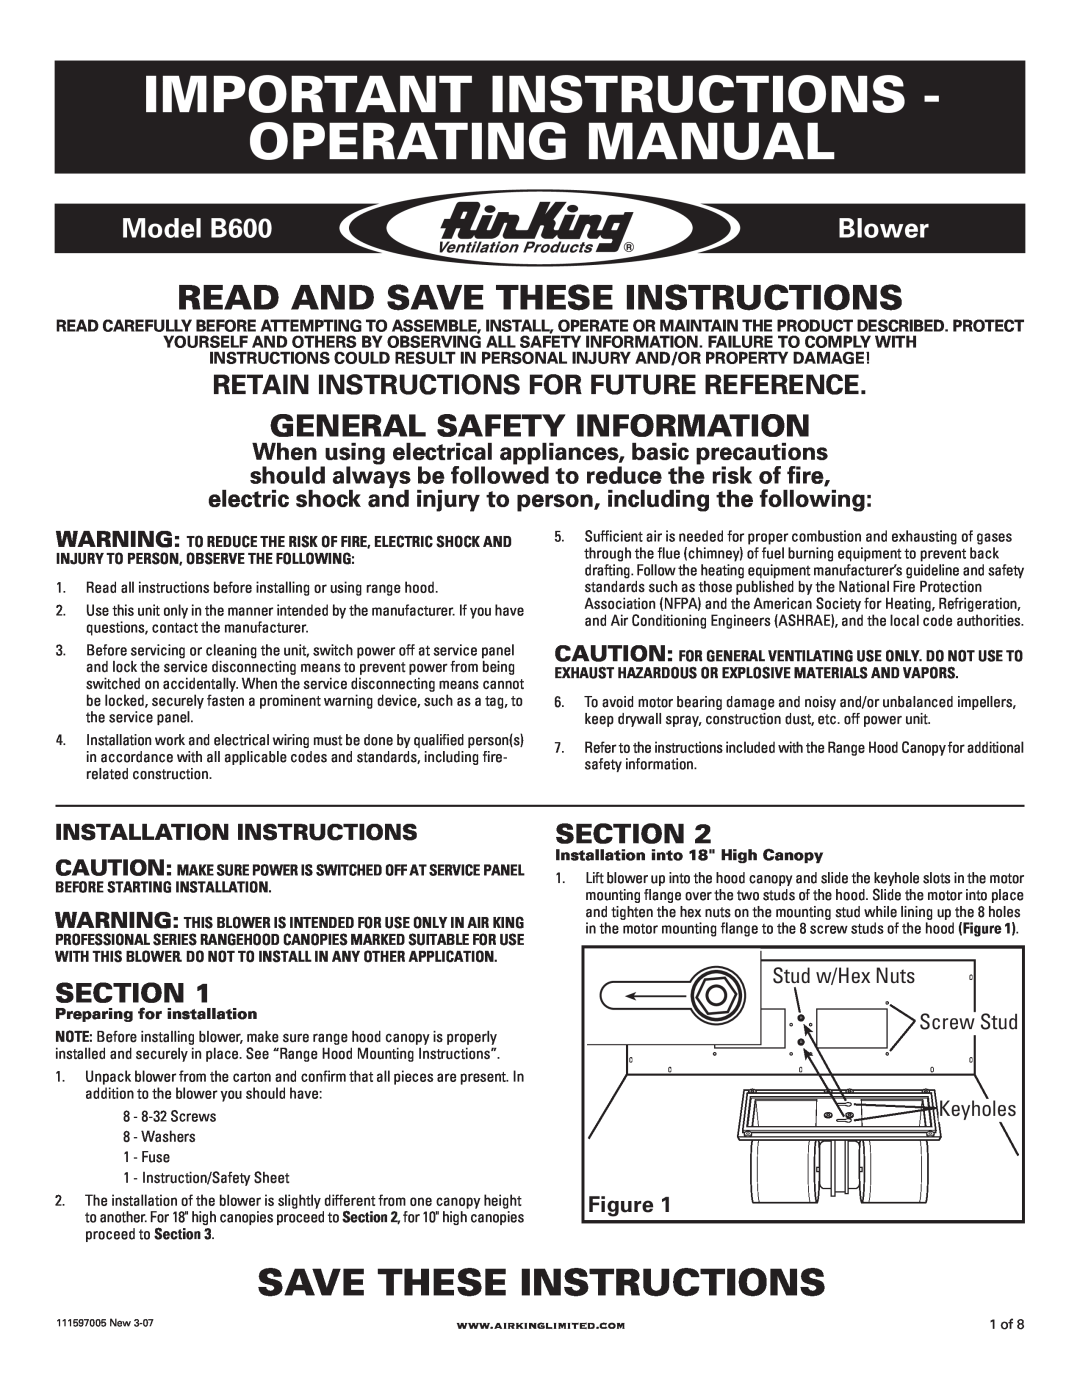 Air King installation instructions Important Instructions Operating Manual, Save These Instructions, Model B600, Blower 